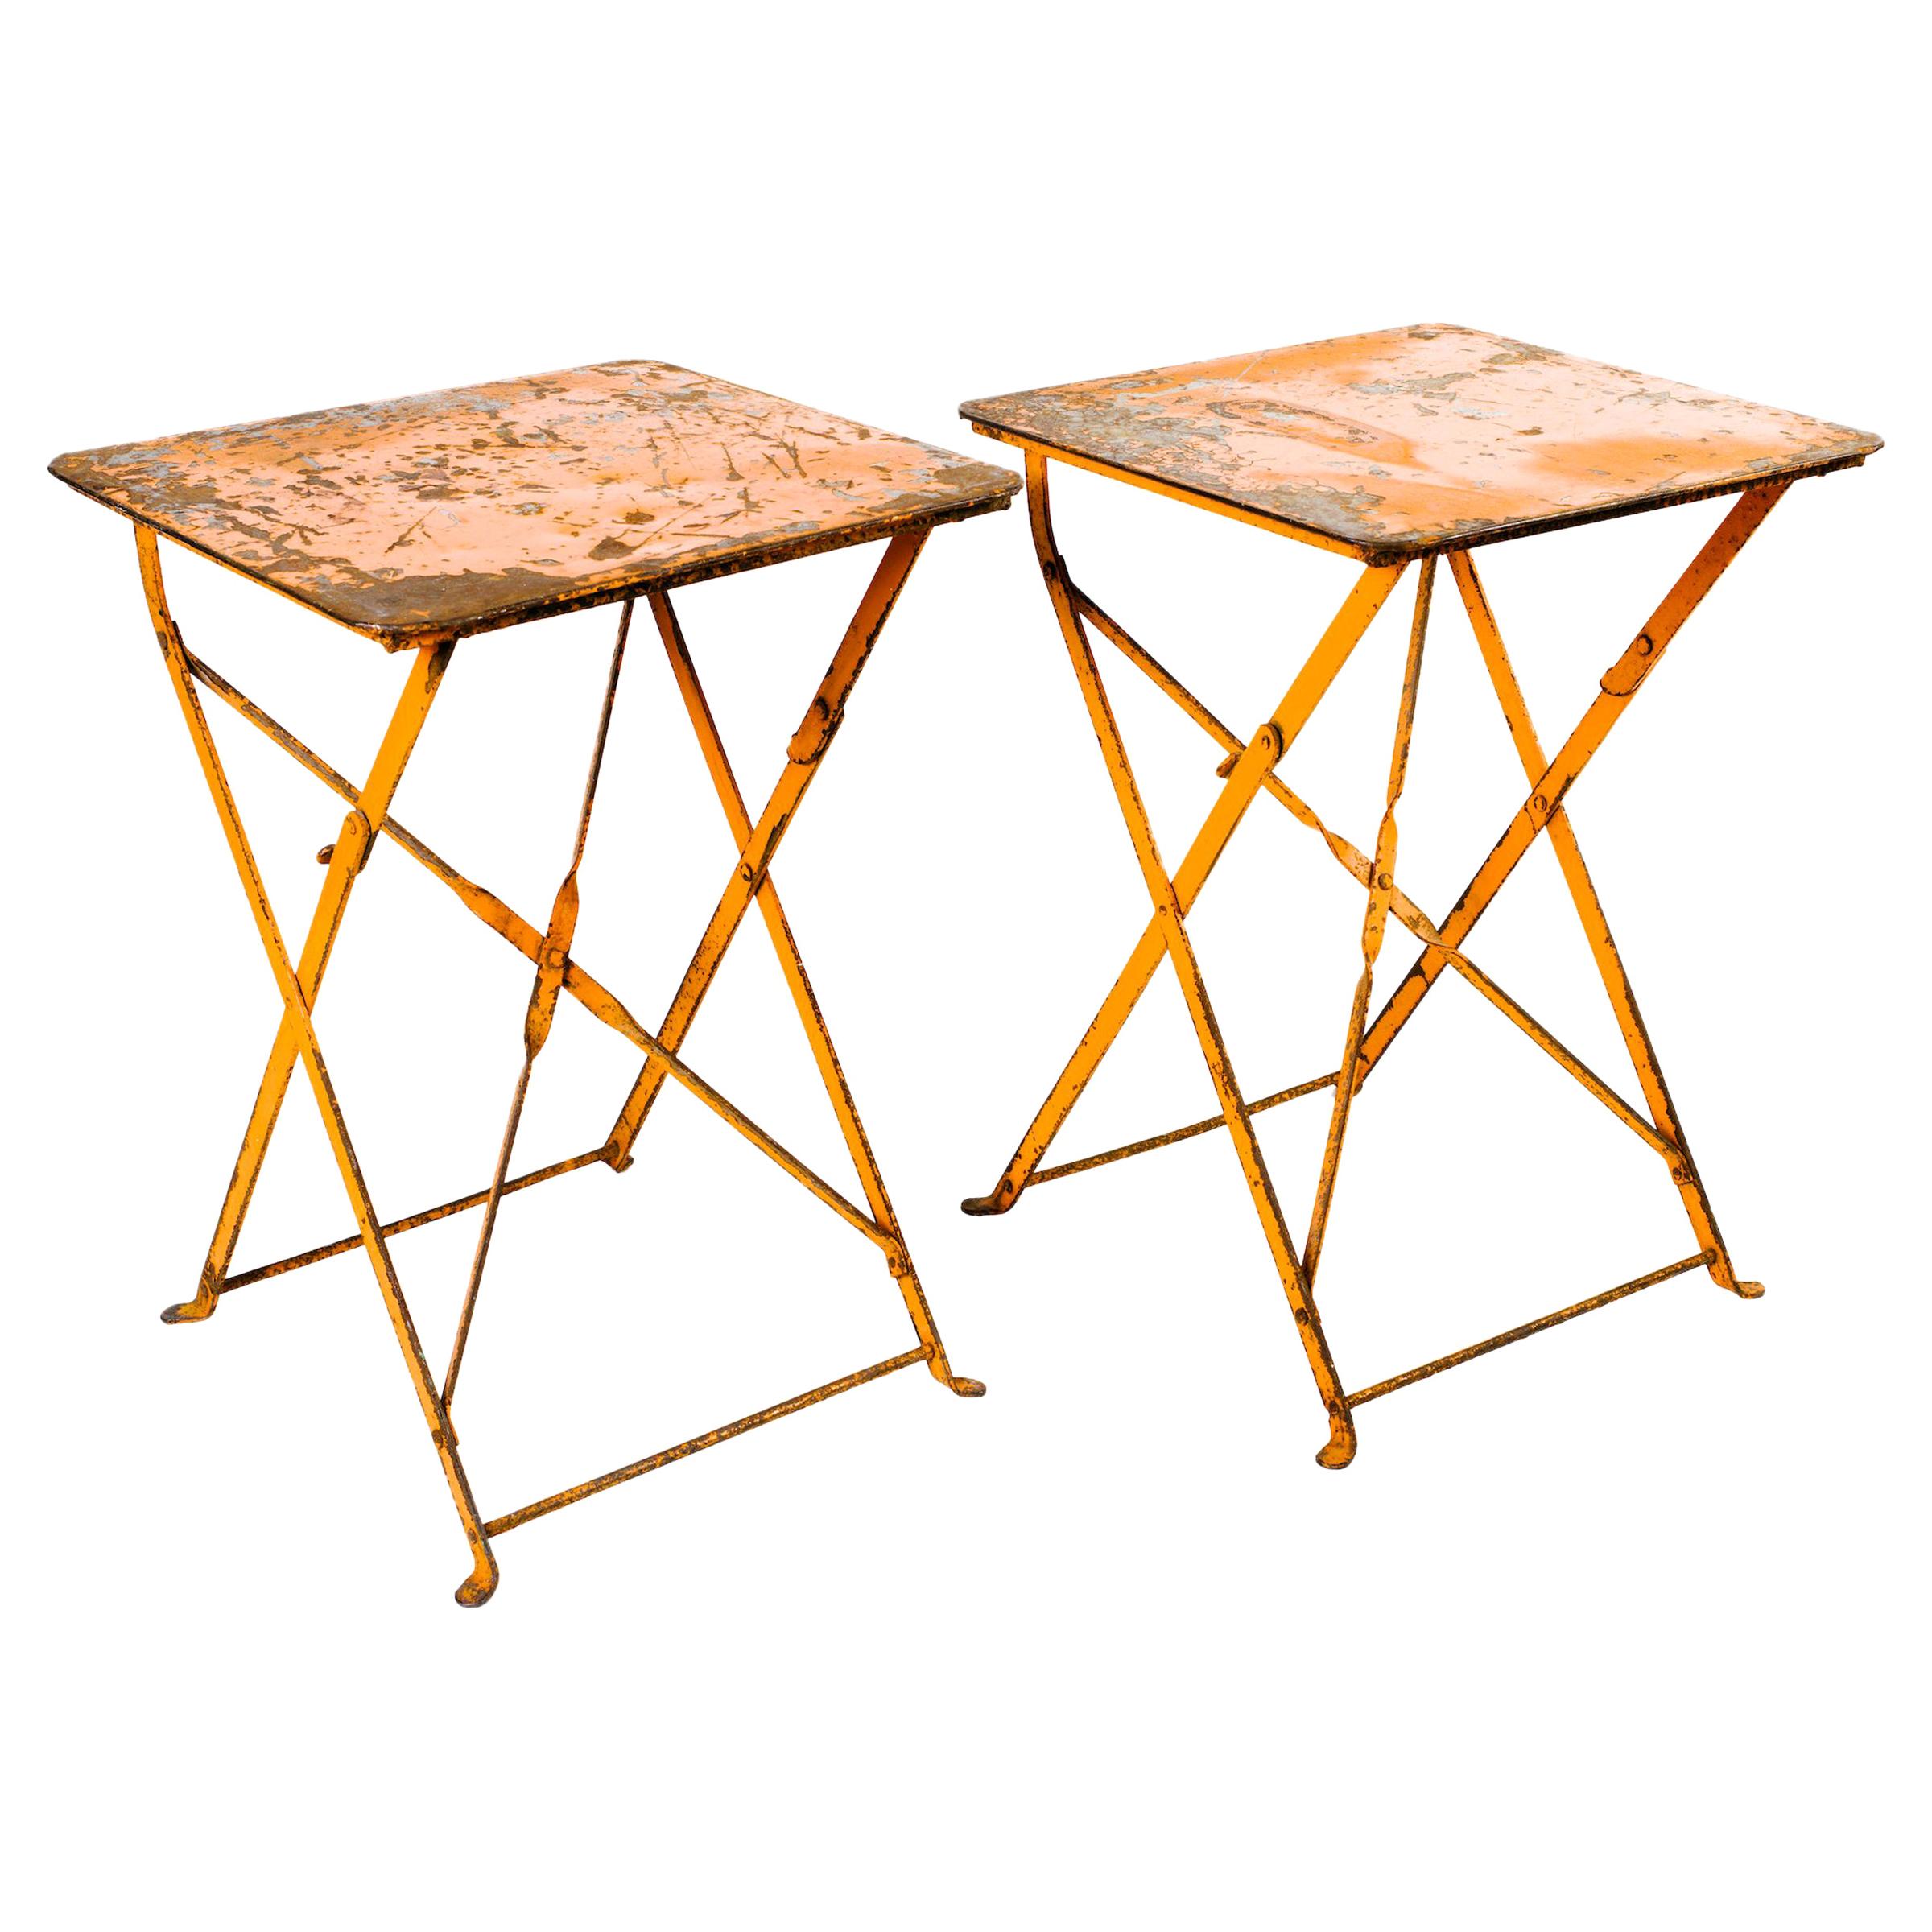 Pair of French Antique Garden Tables in Distressed Orange Iron, c. 1930's